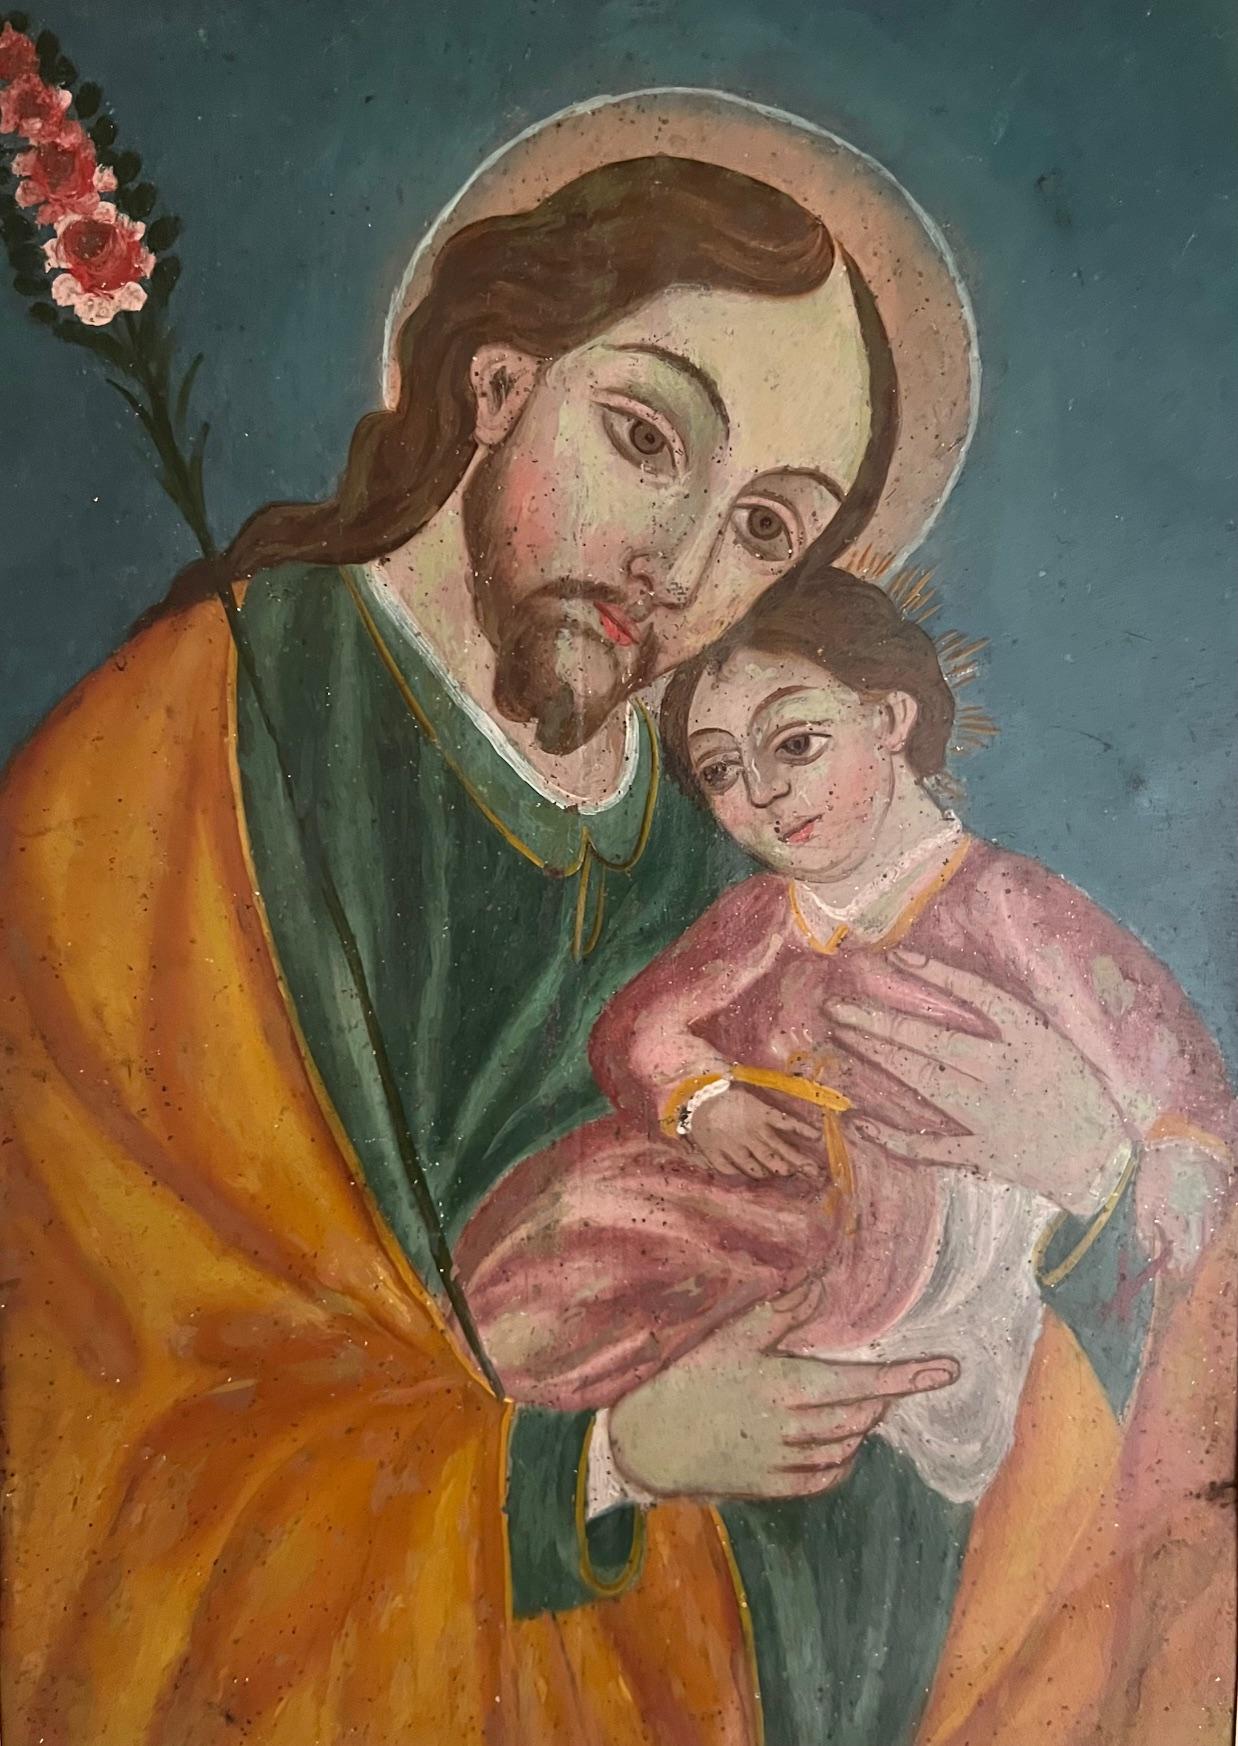 Antique retablo showing Saint Joseph with a child Jesus. Vibrantly painted in rich turquoise and burnt orange colors. Matted in cream and velvet in a vintage wood frame.

Retablo measures about 12.5 x 9.5

Saint Joseph is well known as the patron